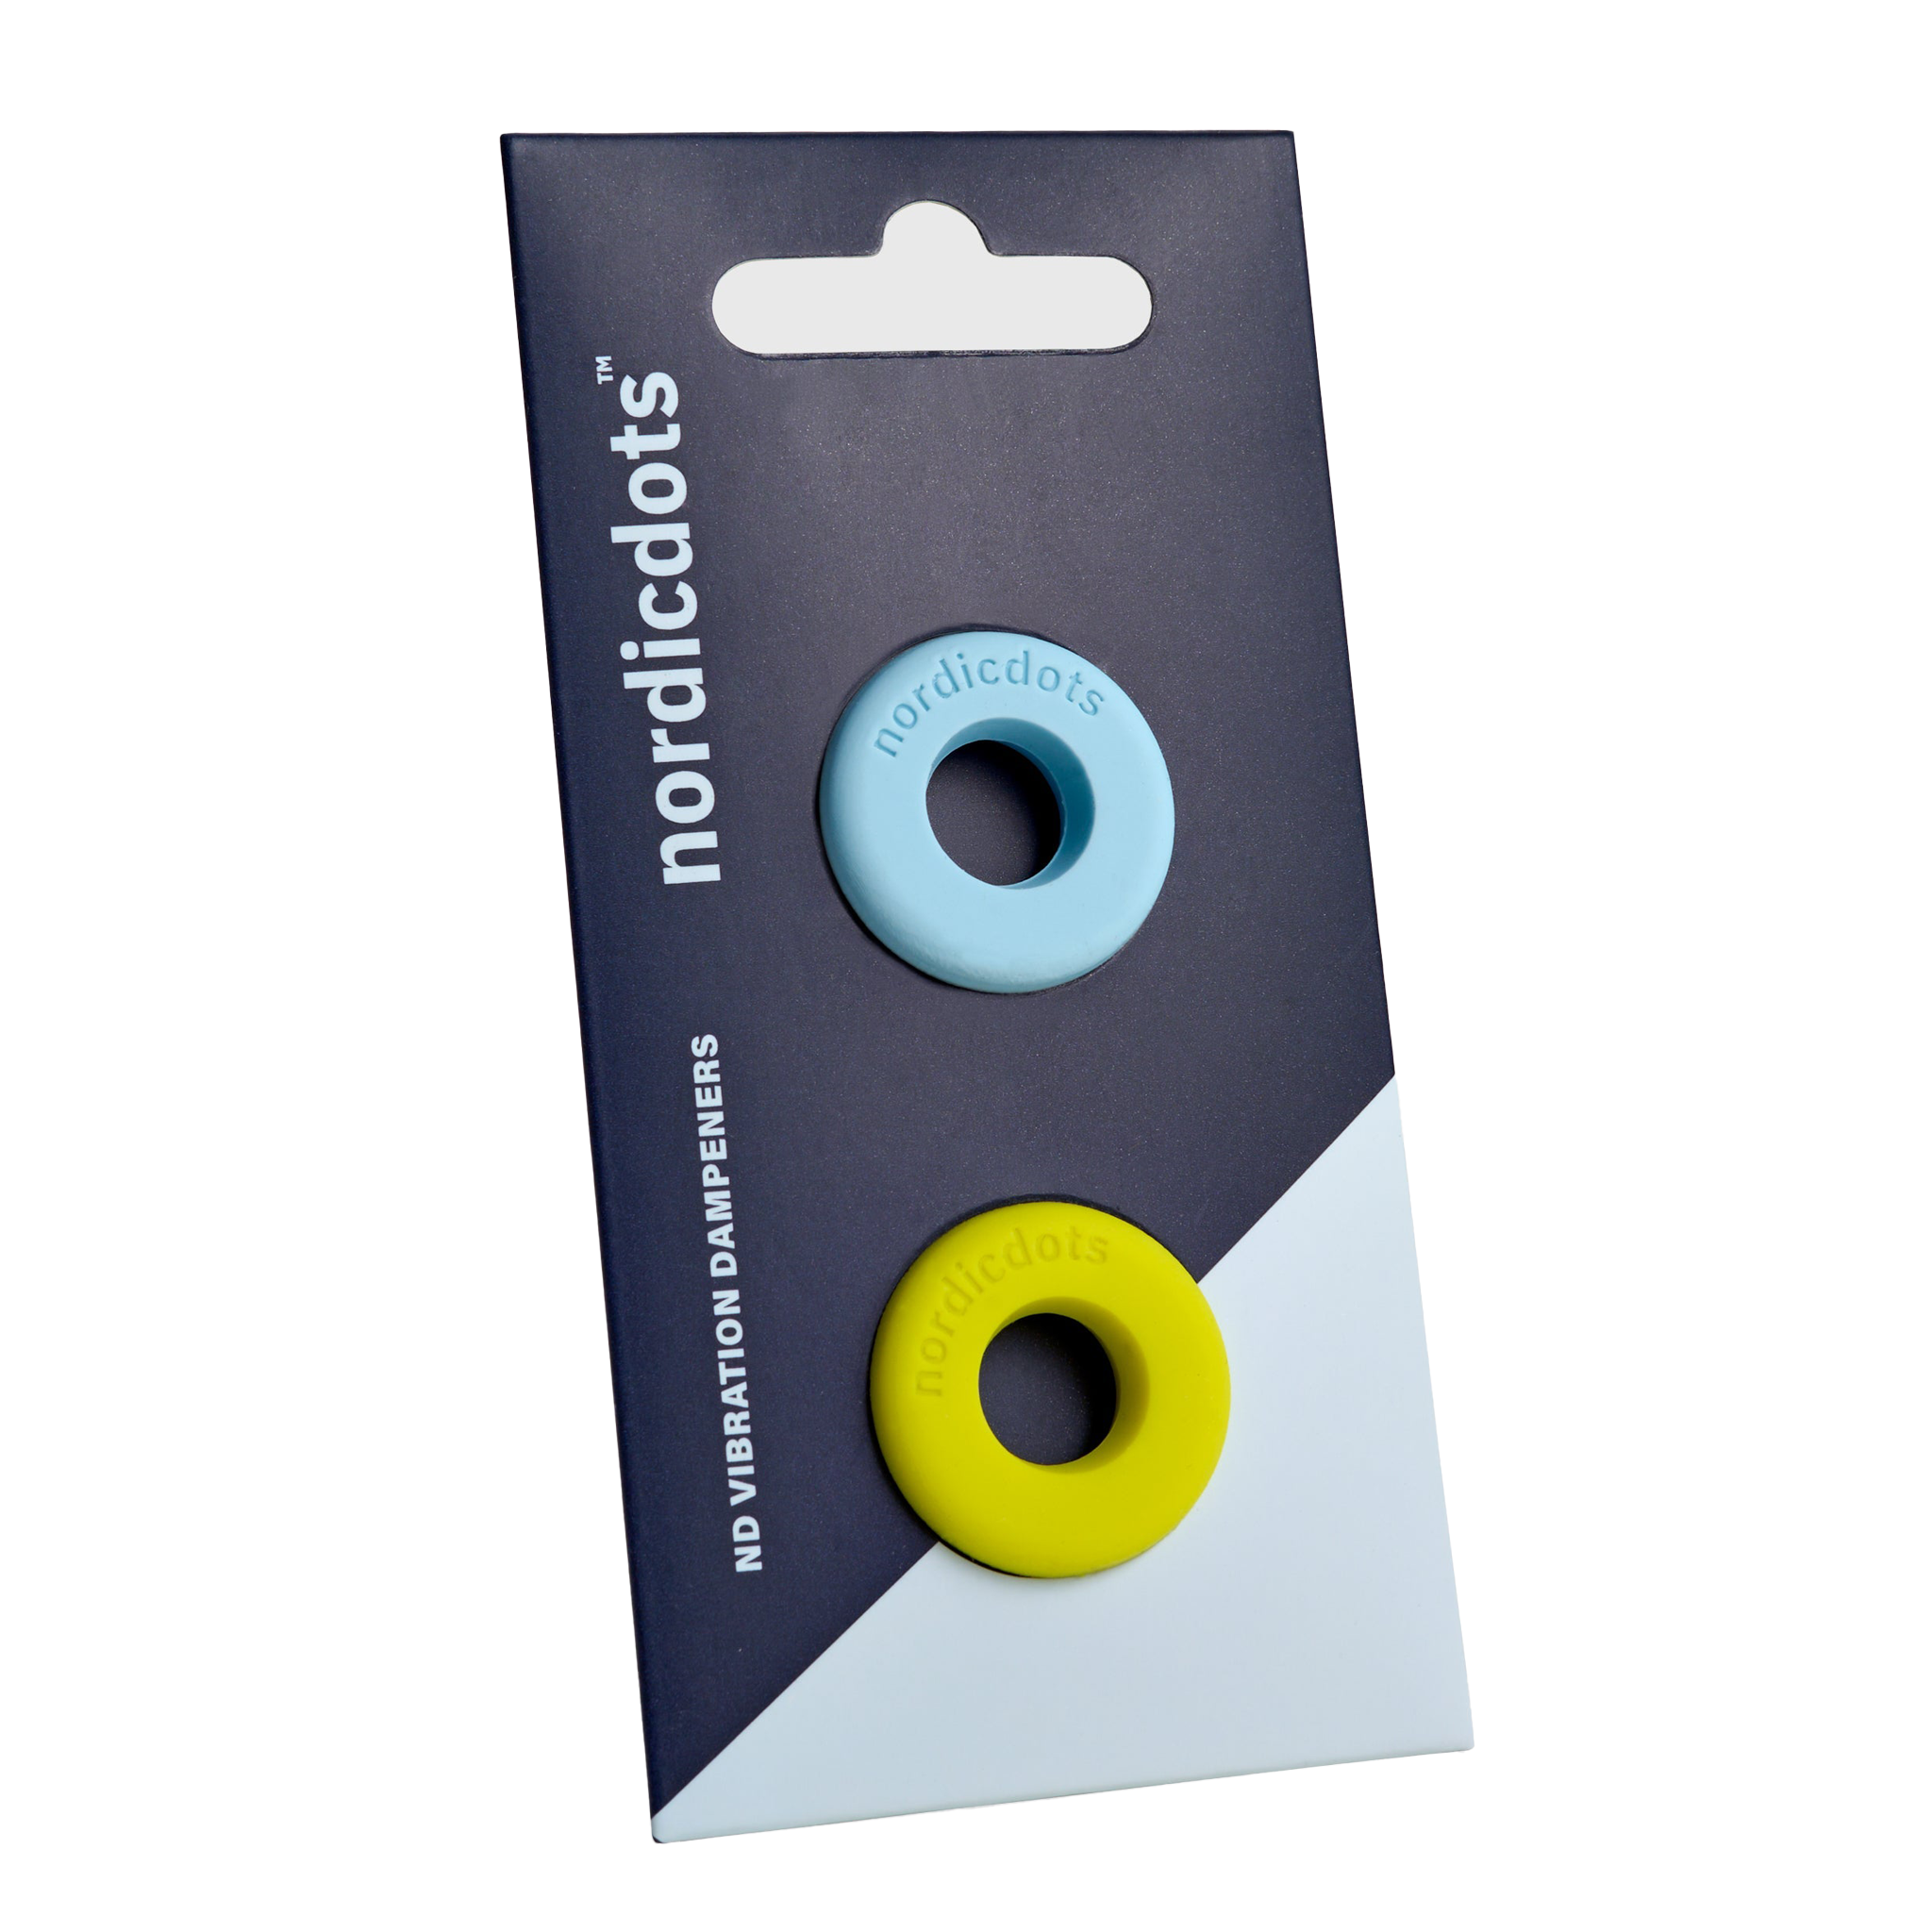 nordicdots ND Vibration Dampeners - Sky Blue / Neon Yellow